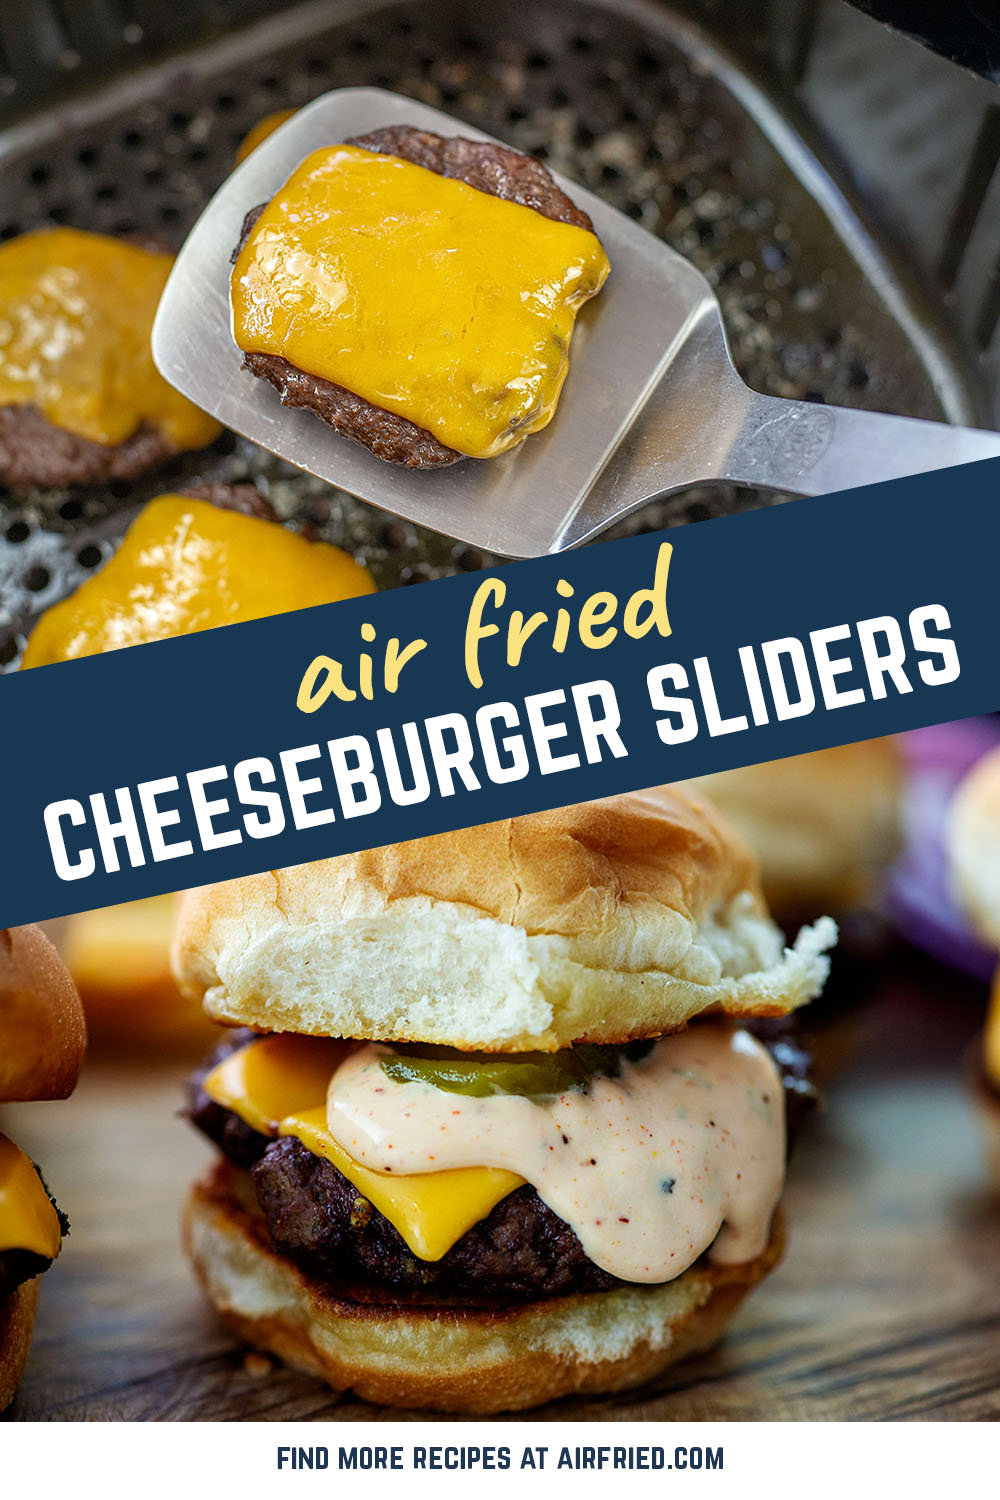 These juicy, flavorful sliders come straight from the air fryer!